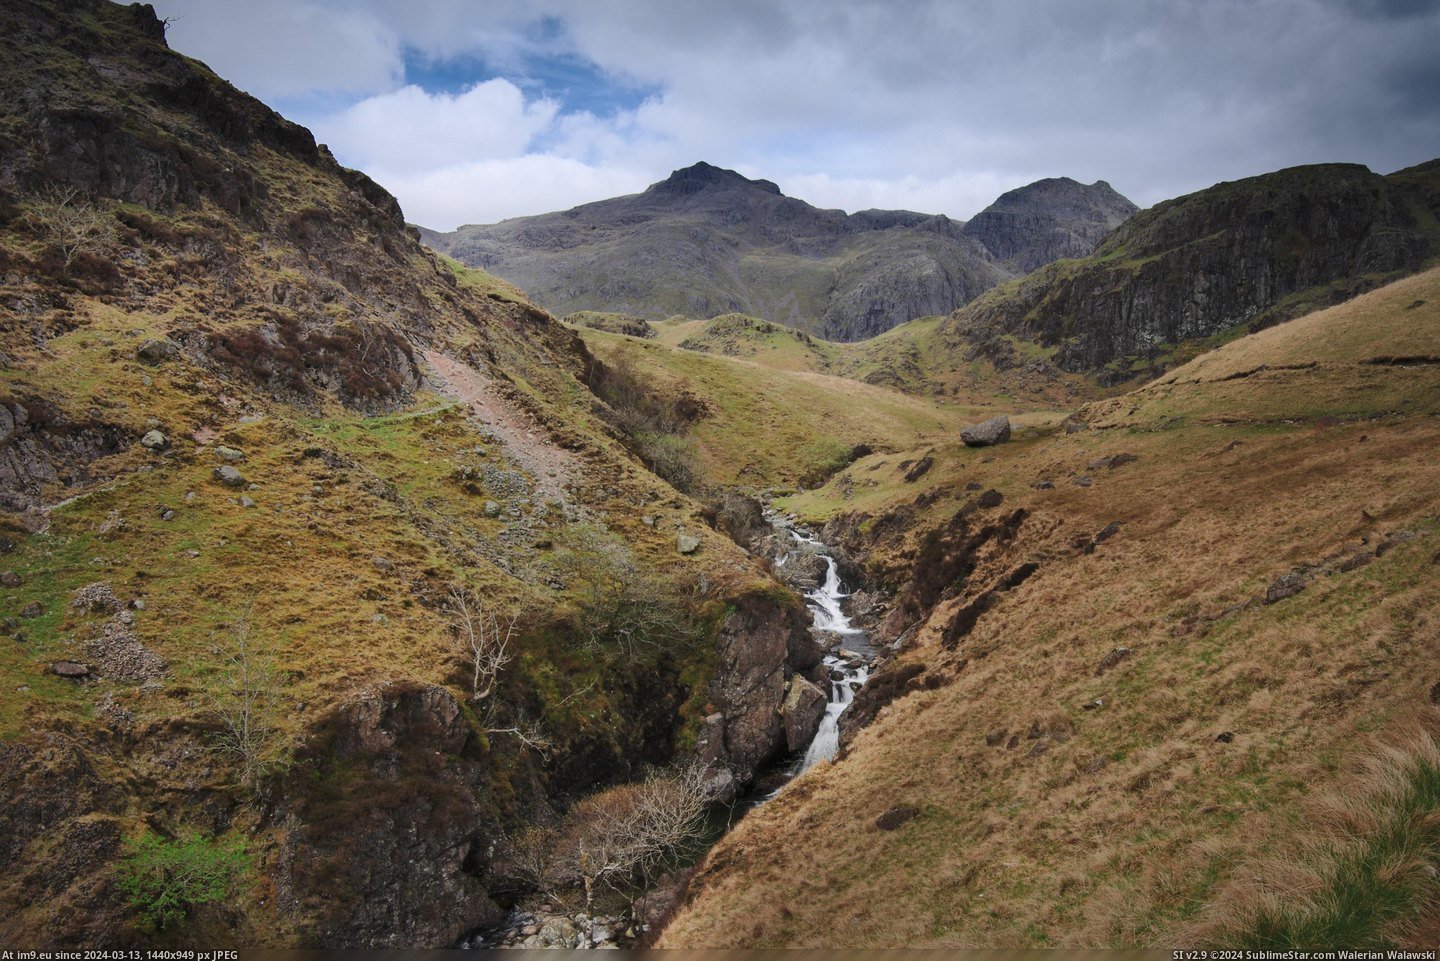 #Lake #District #Revelation #Upper #Gorge [Earthporn] Revelation from the Gorge, Upper Eskdale, Lake District  (3790x2509 Pic. (Image of album My r/EARTHPORN favs))